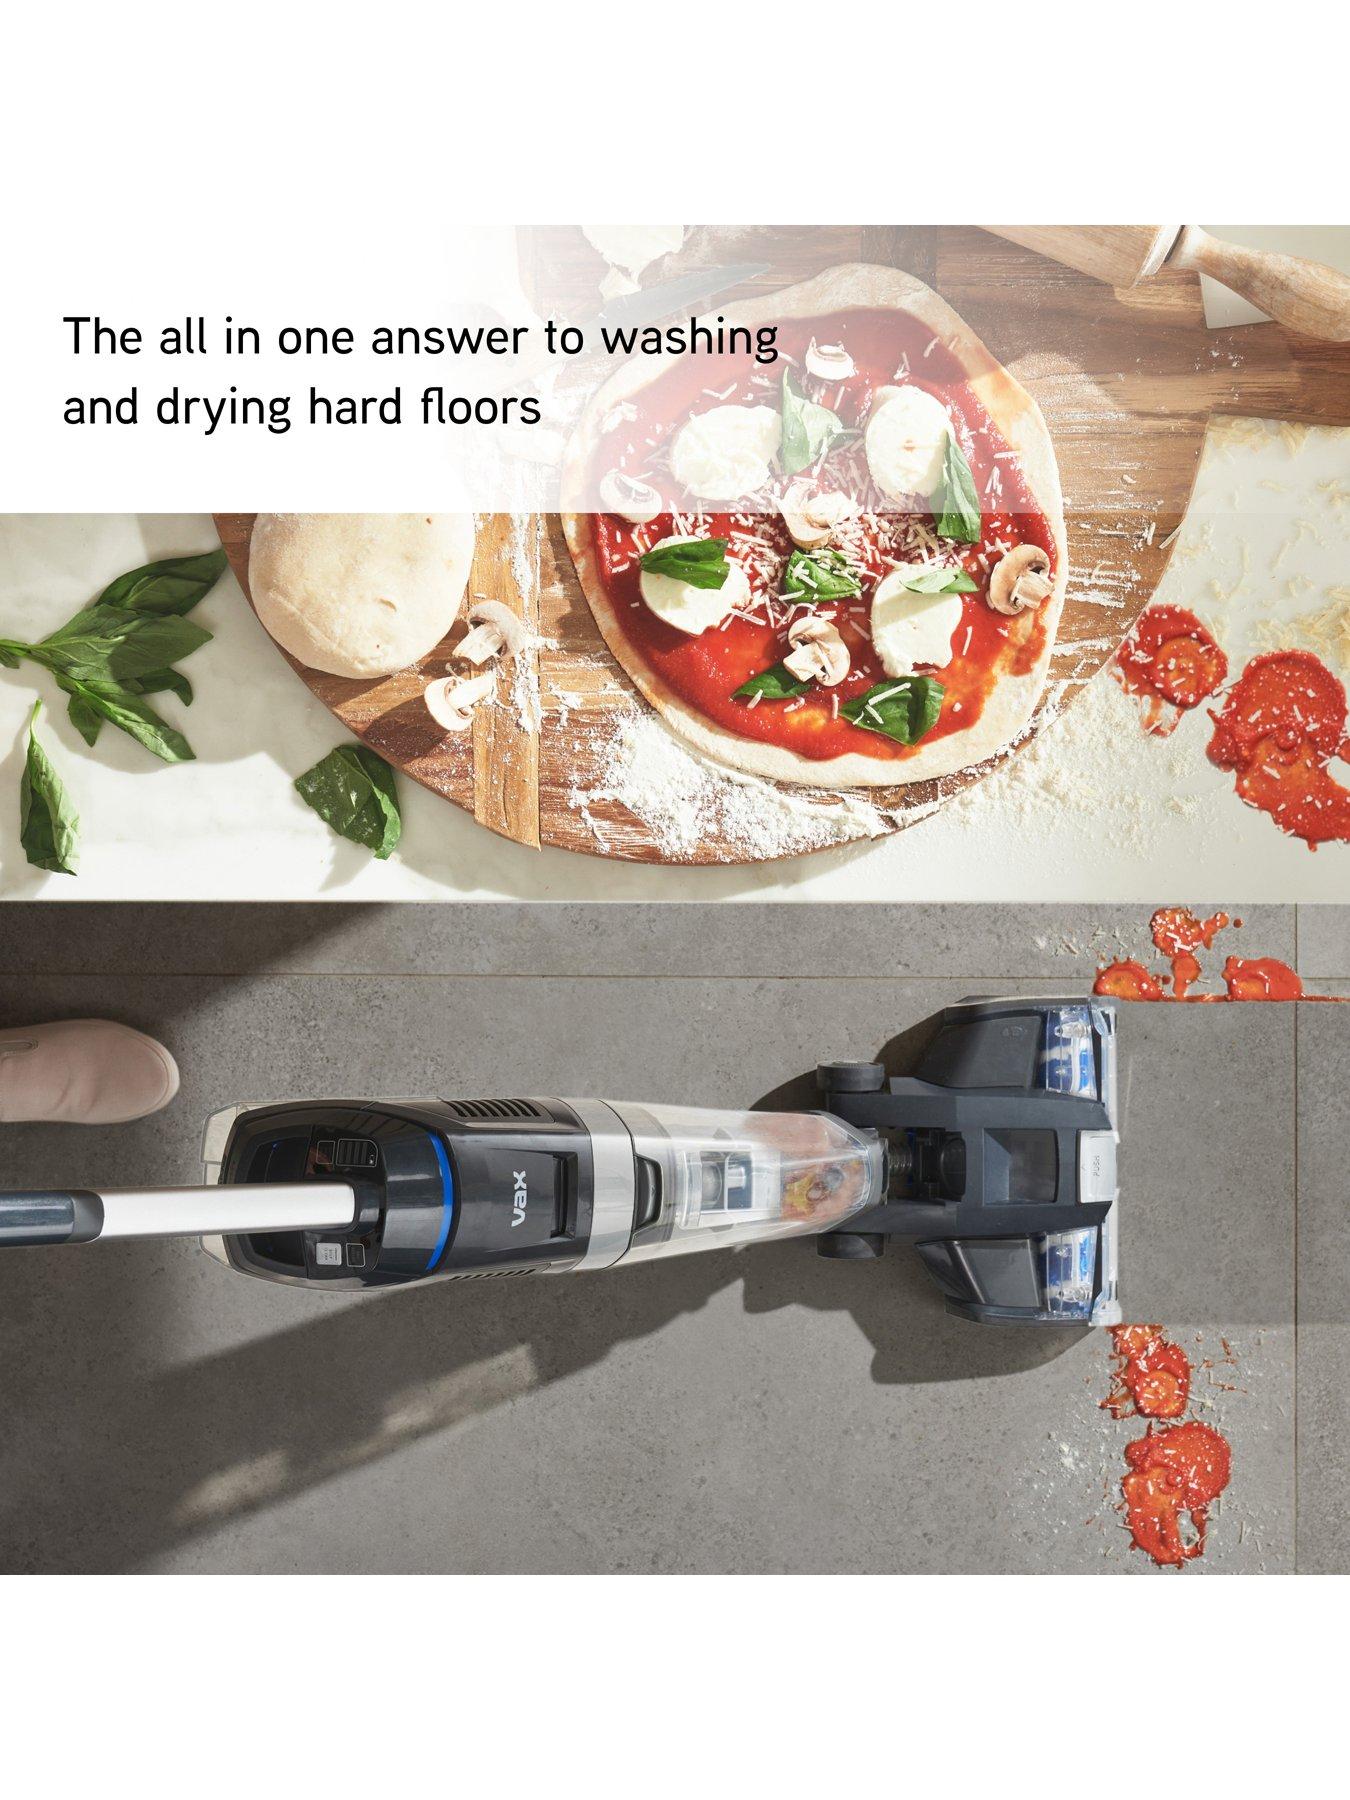 The GHI tries the Vax Glide hard floor cleaner